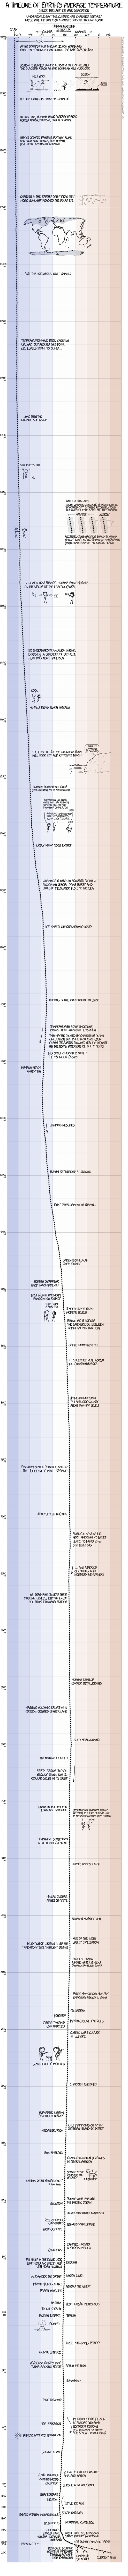 A timeline of Earth's average temperature